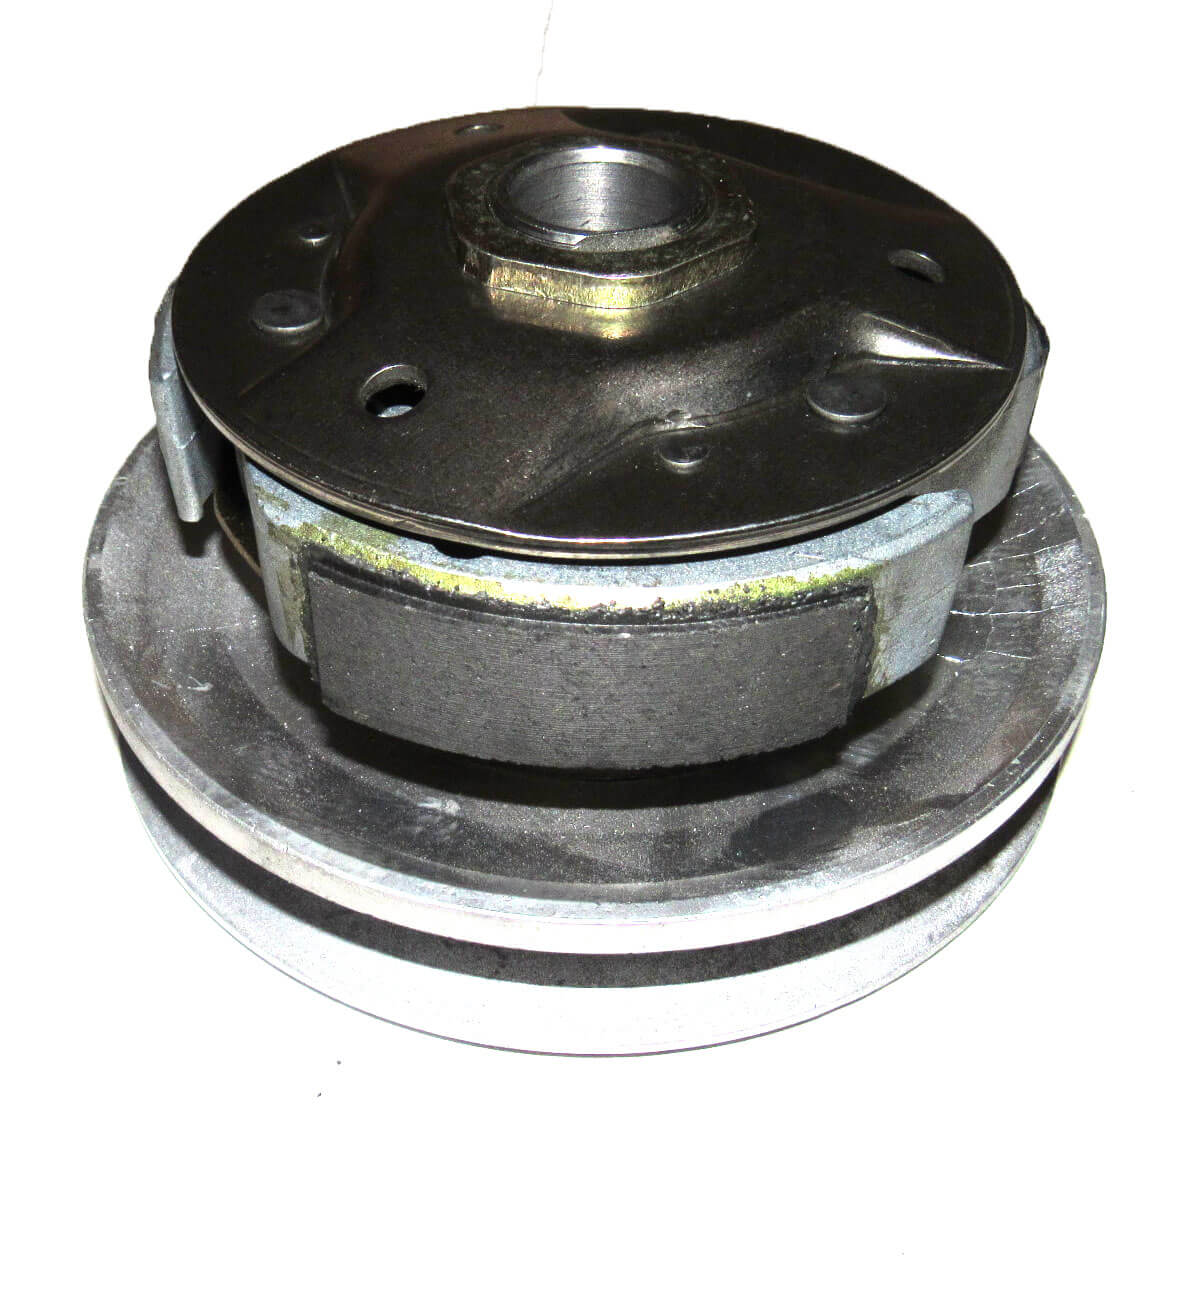 Rear Drive Clutch-Driven Pulley Fits Most 250-300cc GY6 Chinese ATVs, GoKarts, Scooters, UTVs Bell ID=135 Shaft=15 Splines=19